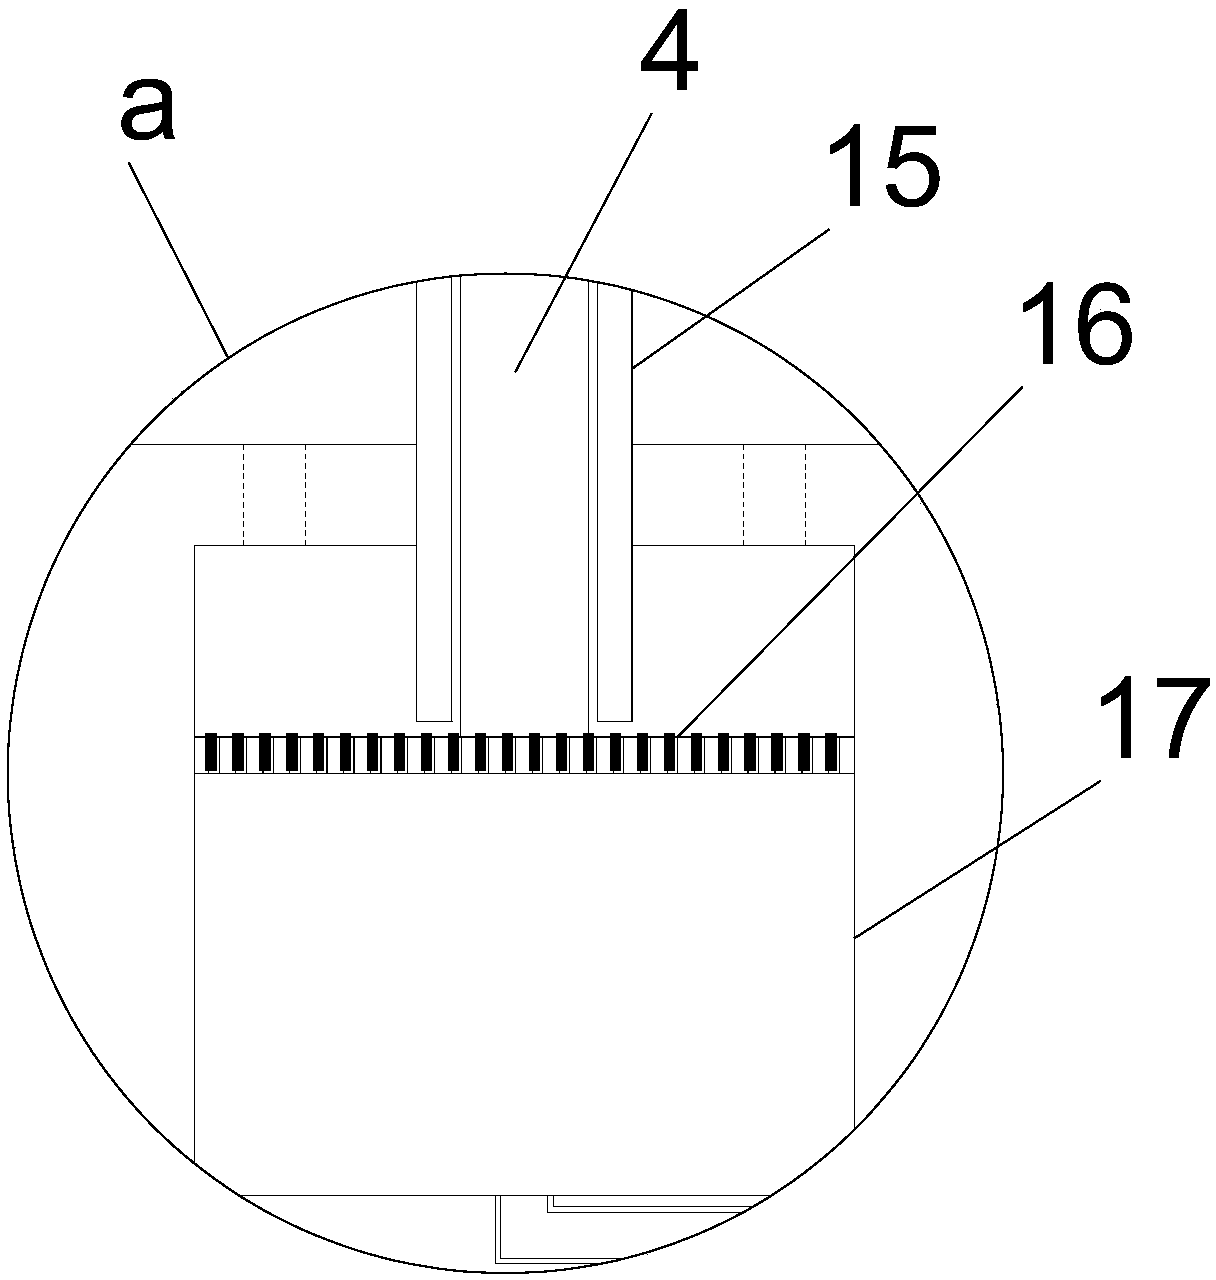 Pneumatic feedback type automobile shock suppressing and absorbing device